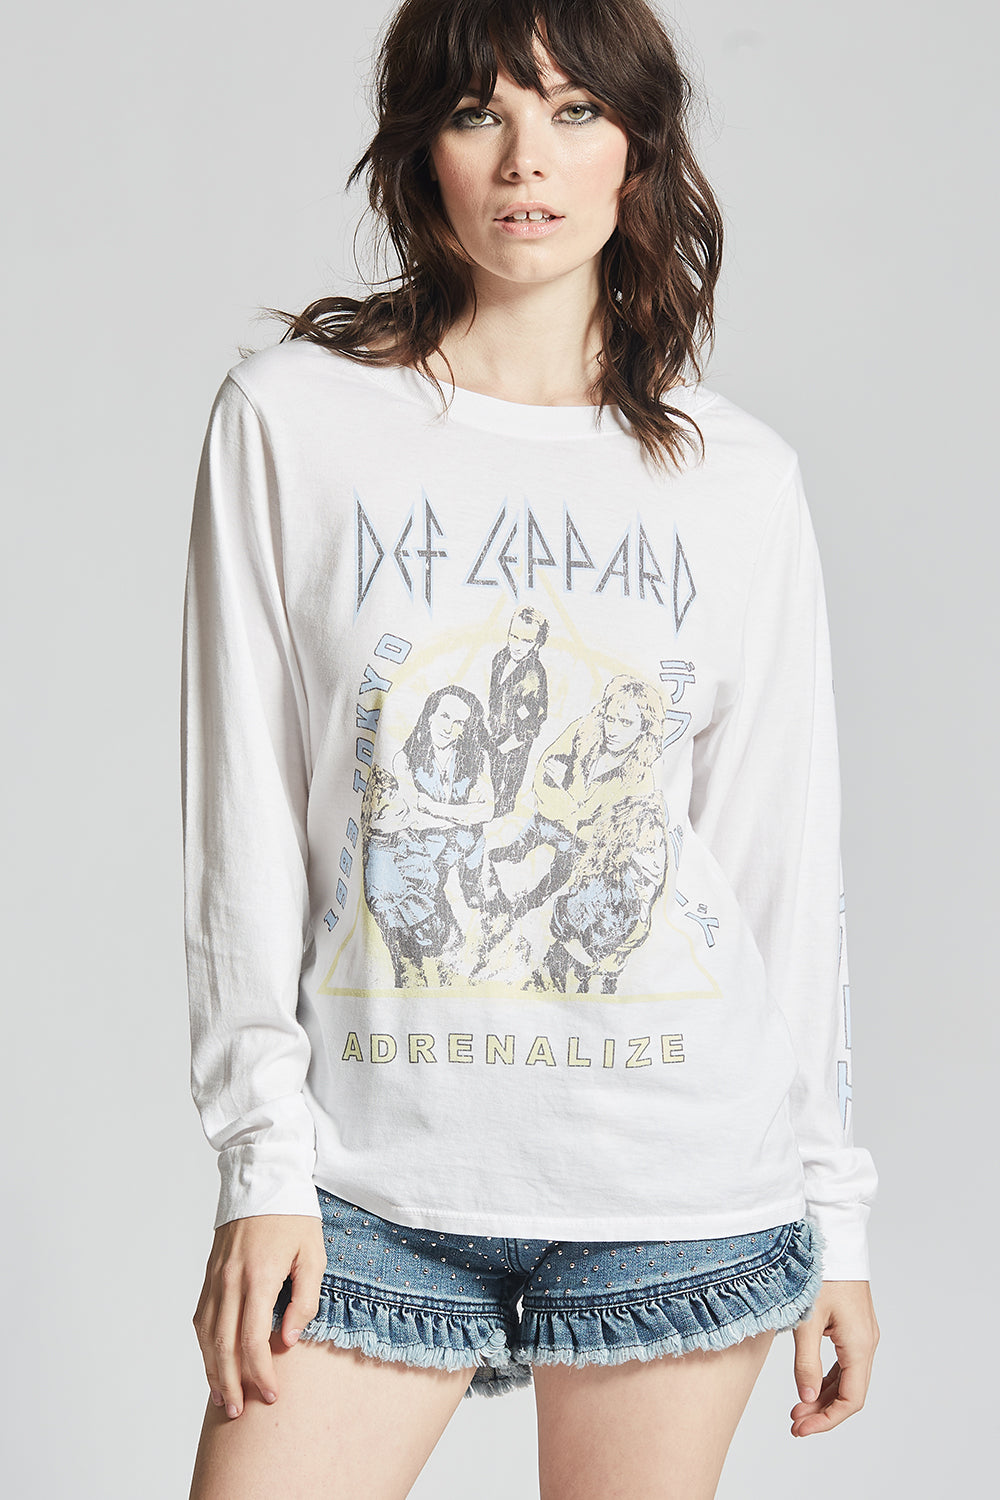 Def Leppard Hysteria Tour 1988 Women's Long Sleeve Vintage Concert T-Shirt by Chaser Brand